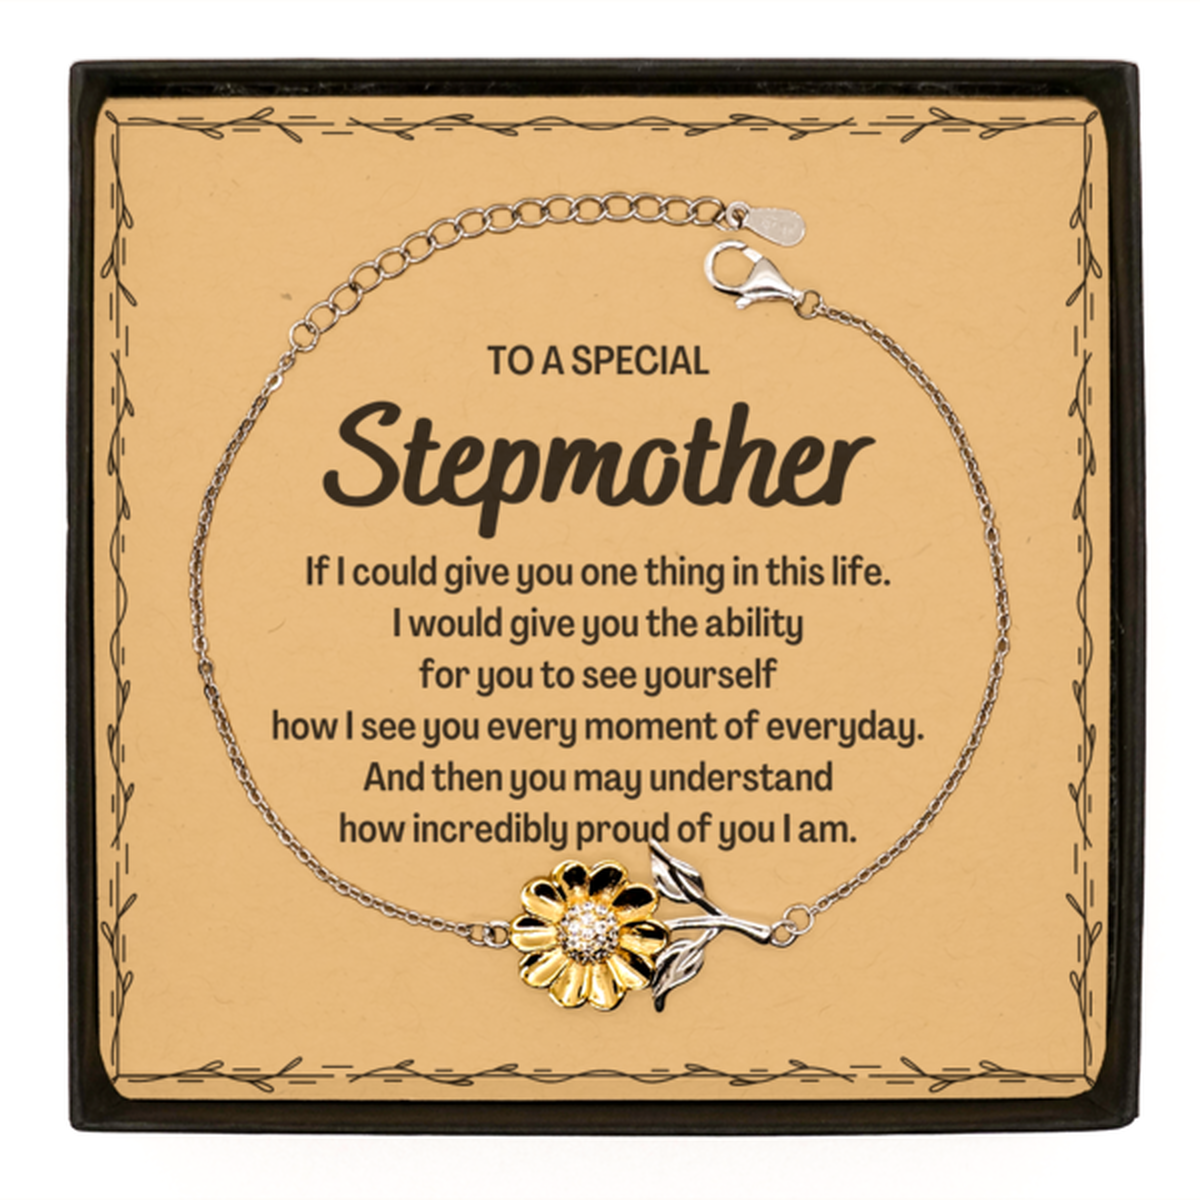 To My Stepmother Sunflower Bracelet, Gifts For Stepmother Message Card, Inspirational Gifts for Christmas Birthday, Epic Gifts for Stepmother To A Special Stepmother how incredibly proud of you I am